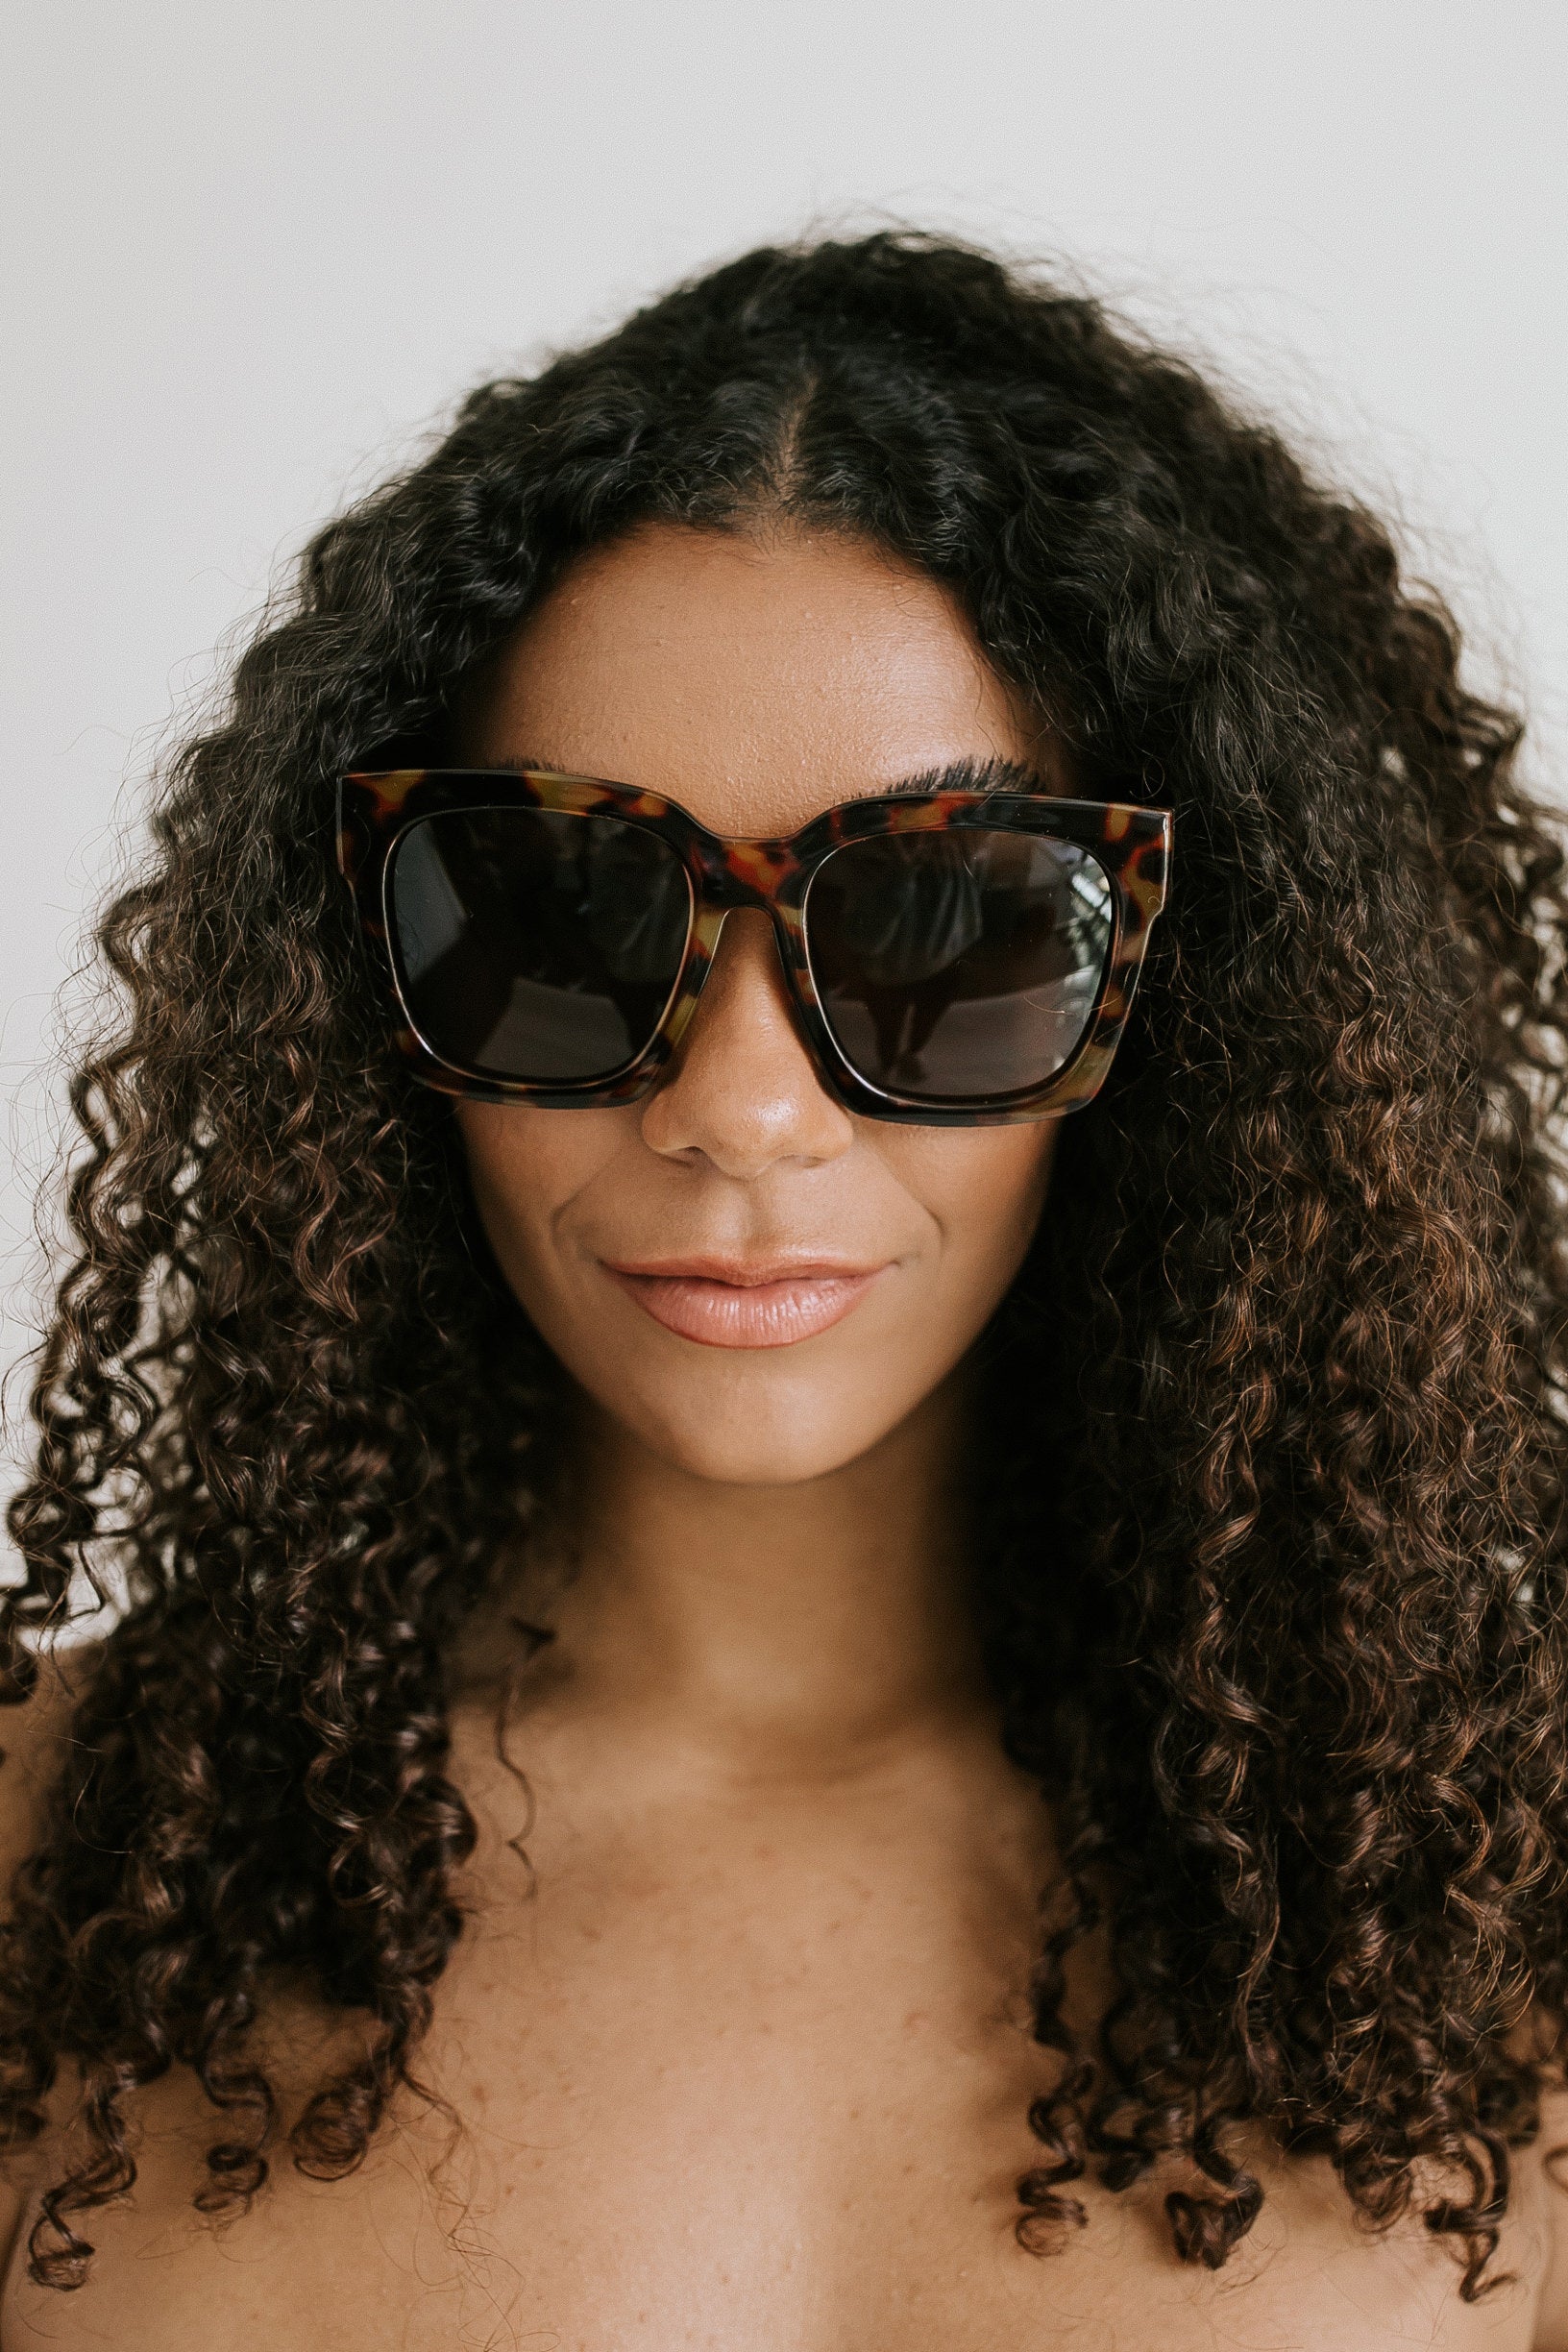 ANEA HILL London Sunglasses: High-Quality Shades for Style. | ANEA HILL